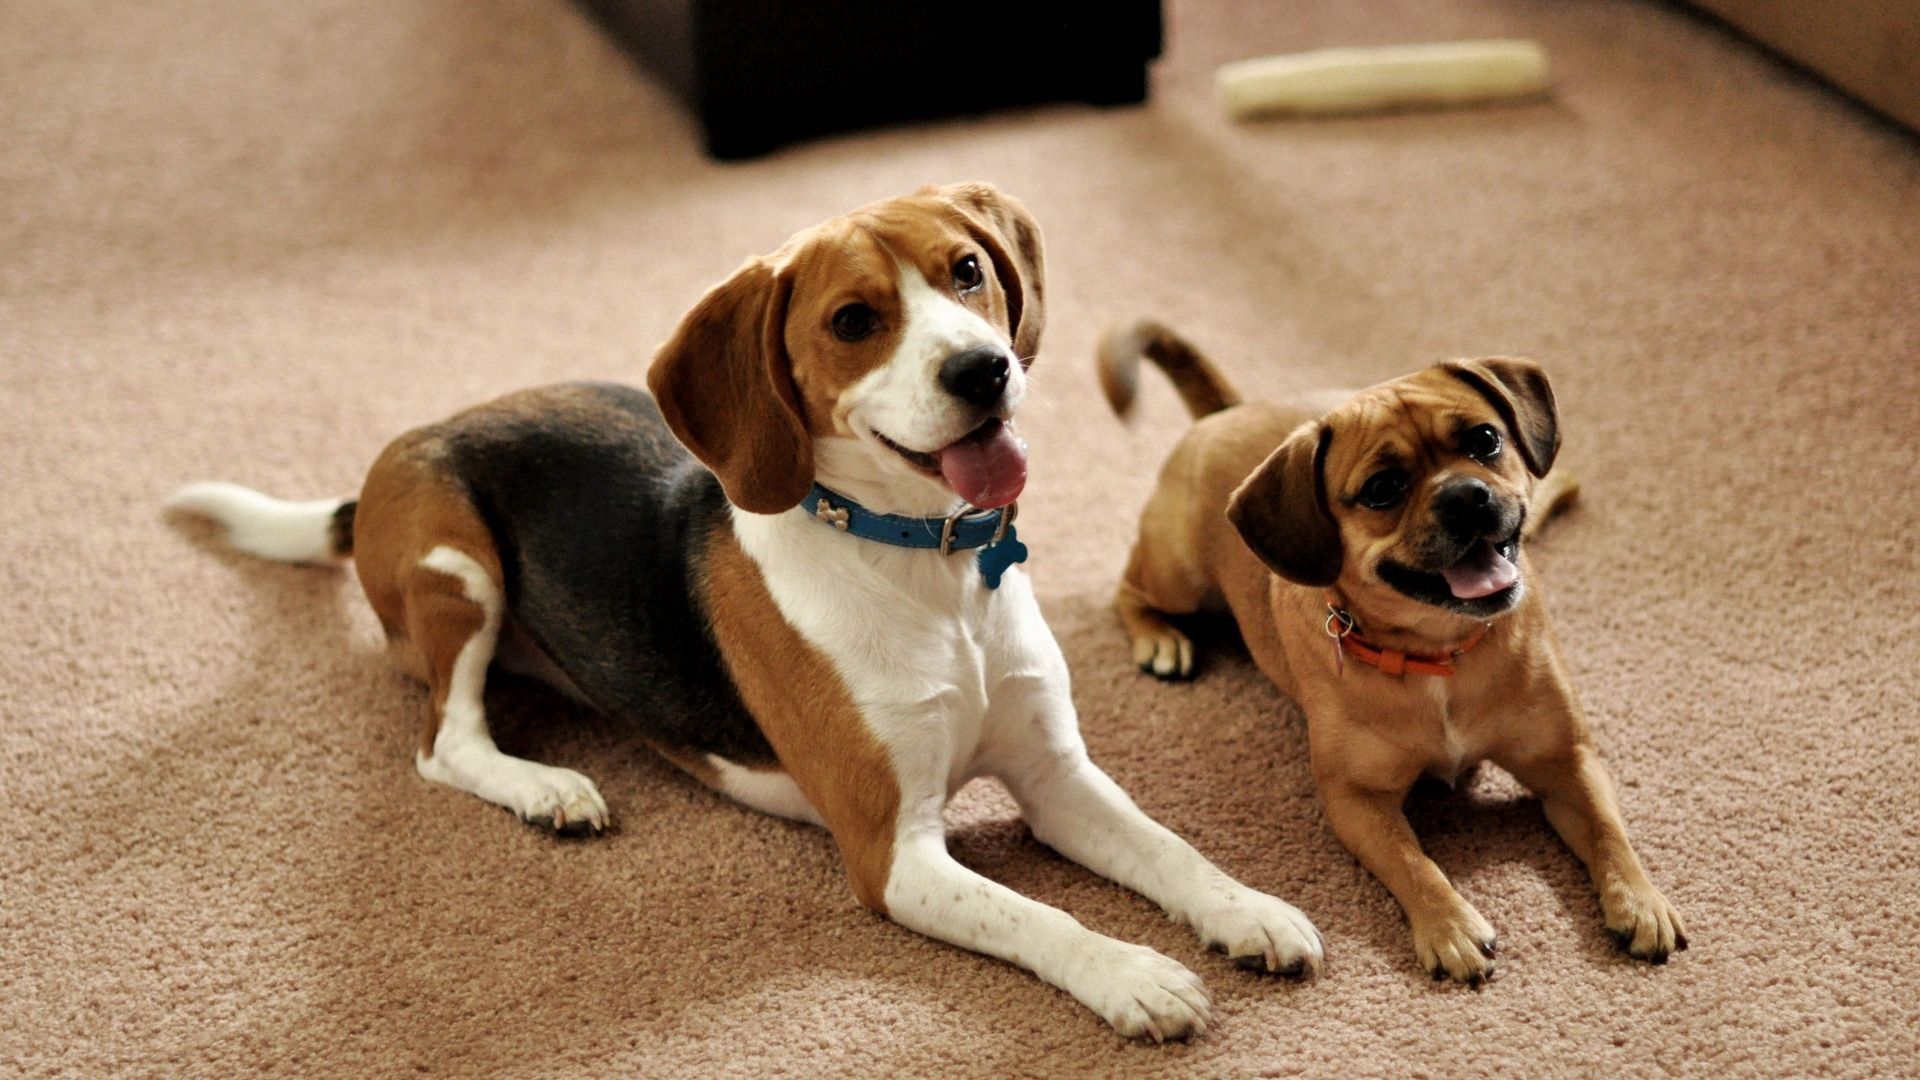 animals, dogs, sit, couple, pair, puppies, expectation, waiting, beagle